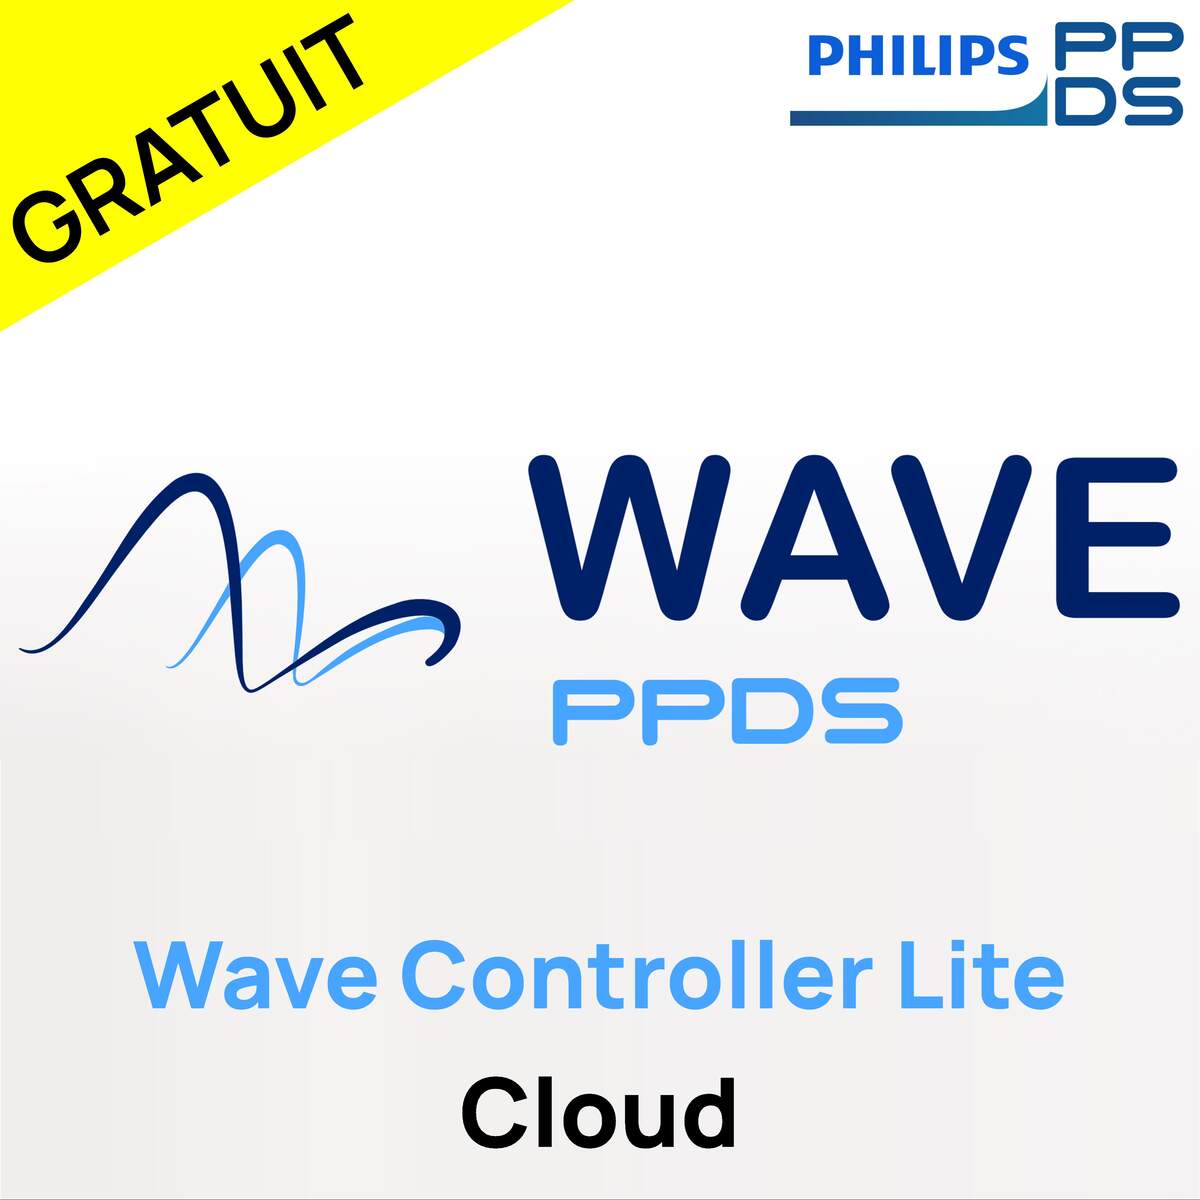 Philips Wave - PPDS Wave image